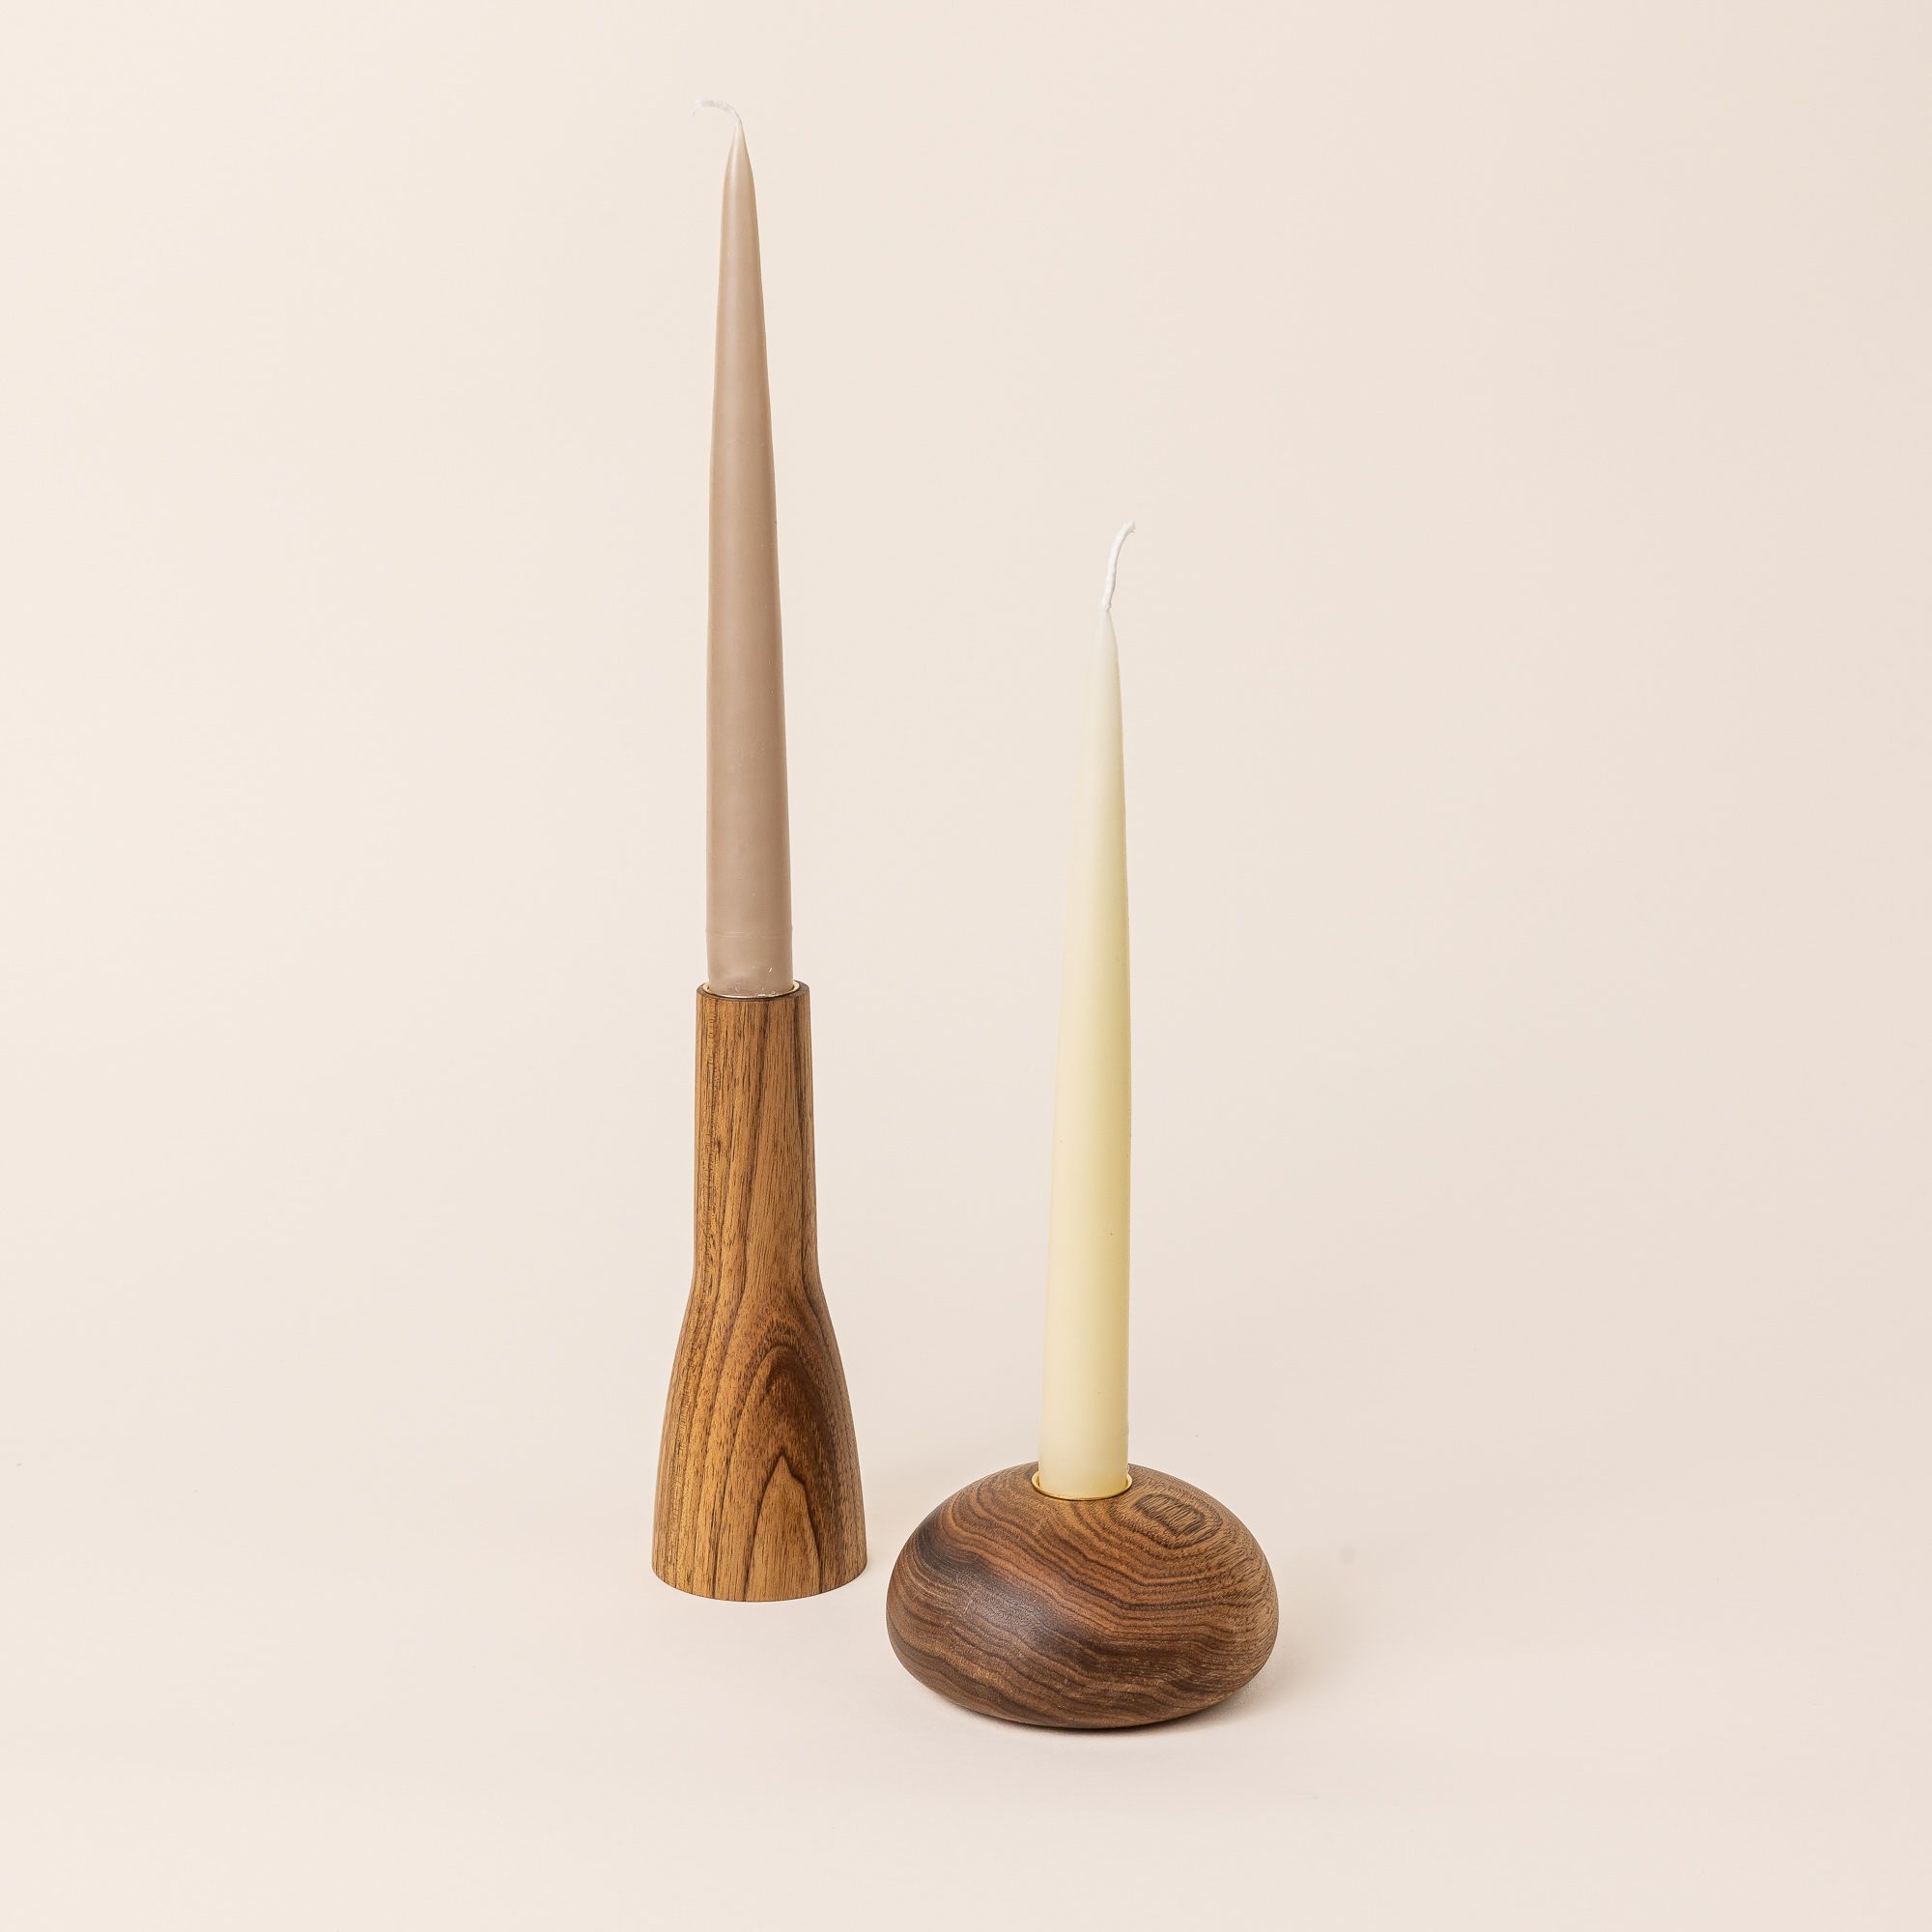 Two butternut wood candle holders, one is a more narrow organic shape, and the other is shaped more like a dome. Taper candles sit on top of each.